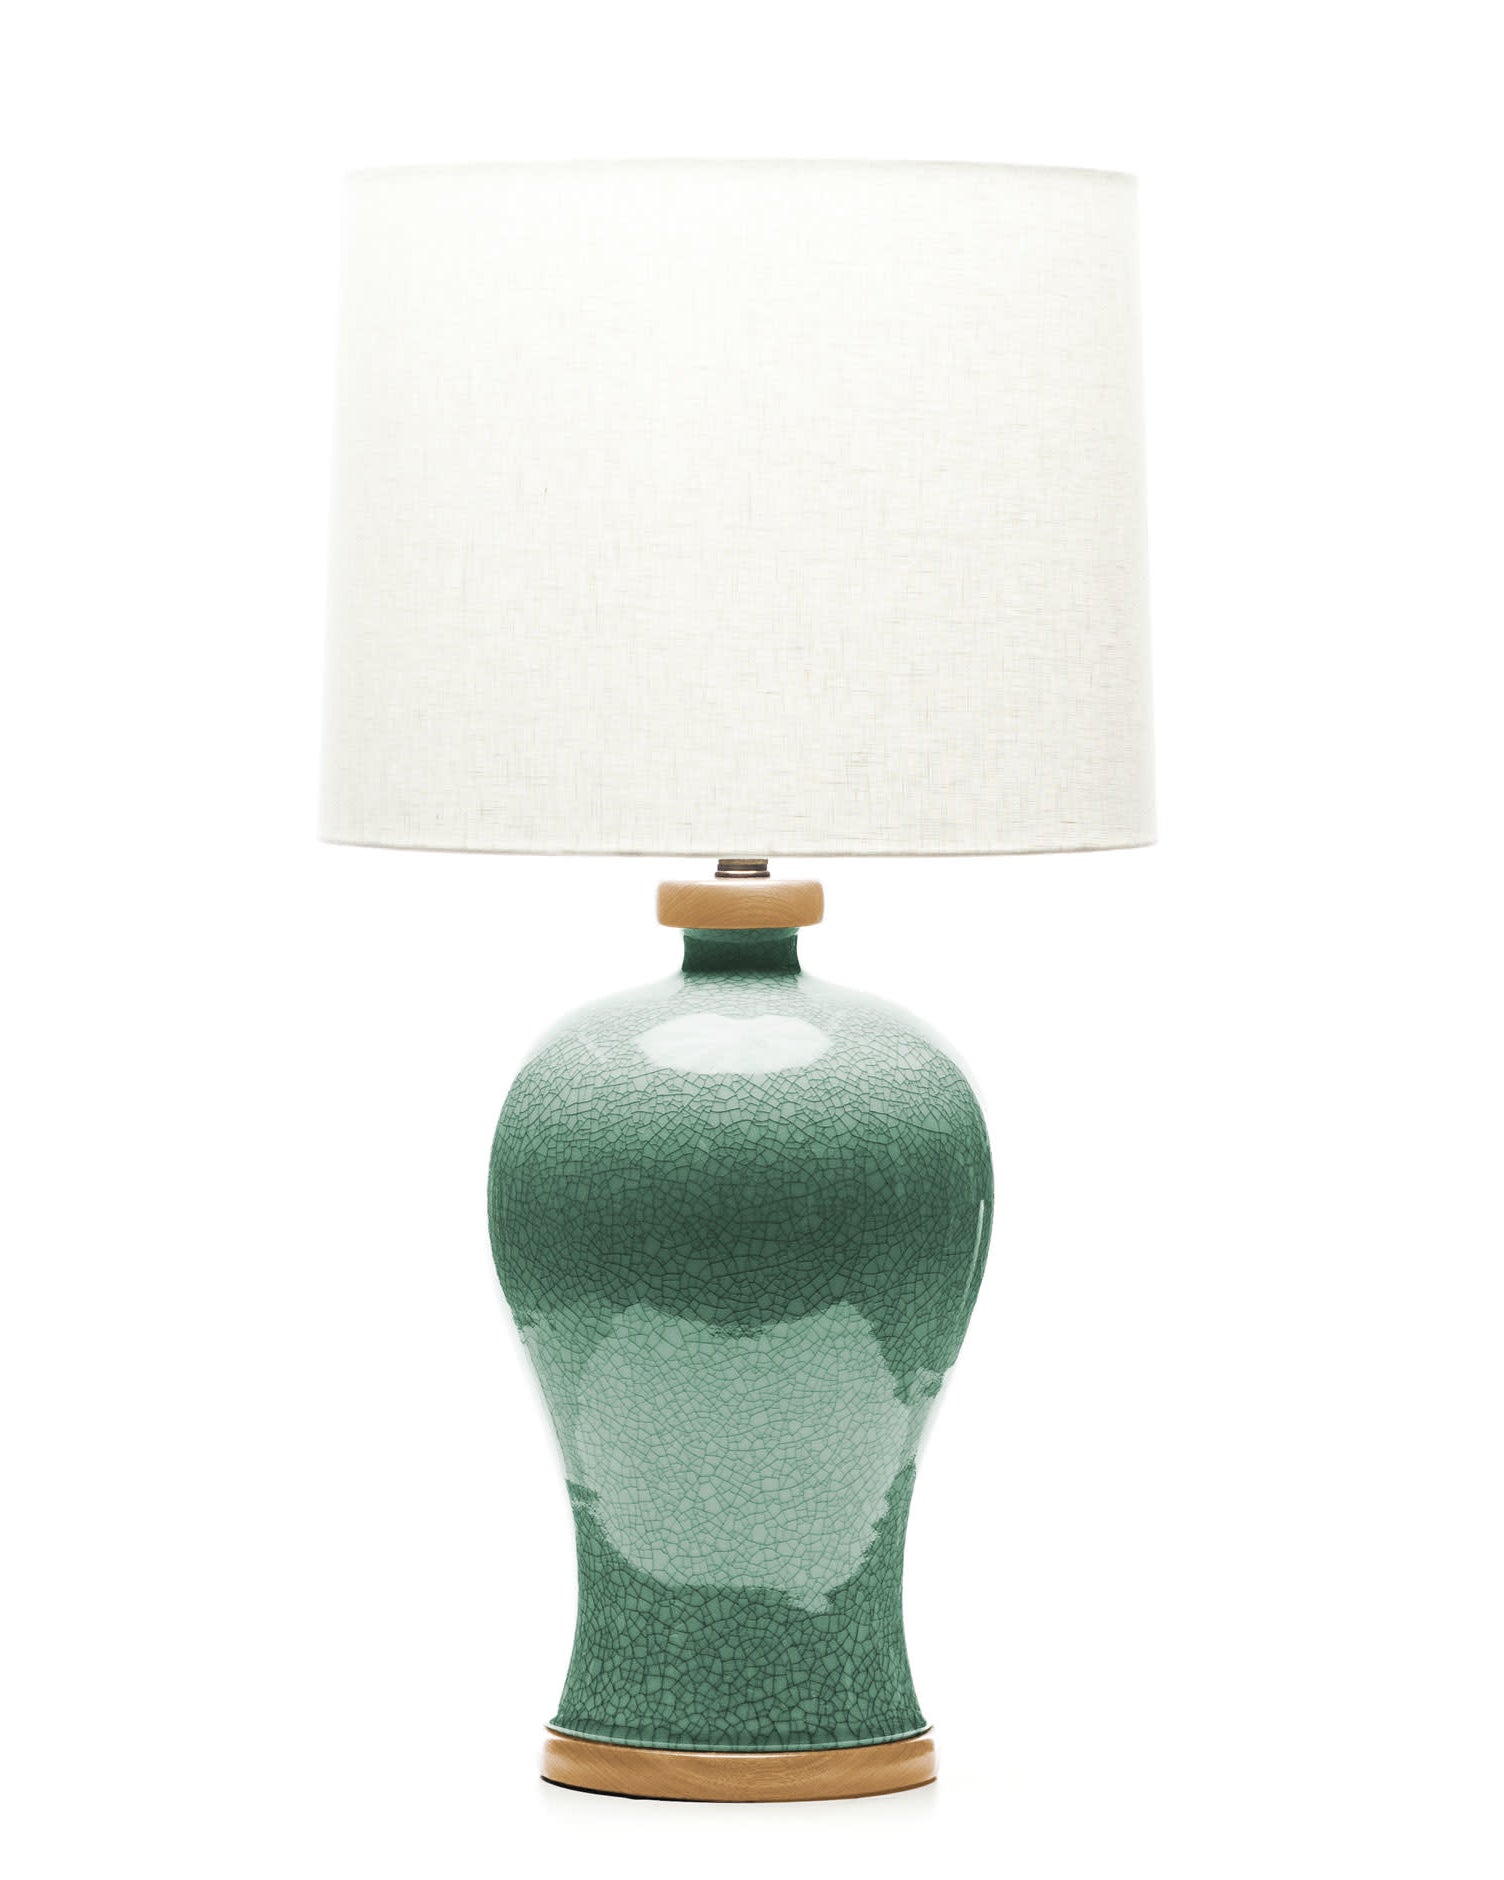 Lawrence & Scott Dashiell Table Lamp in Aquamarine Crackle with Oak Base